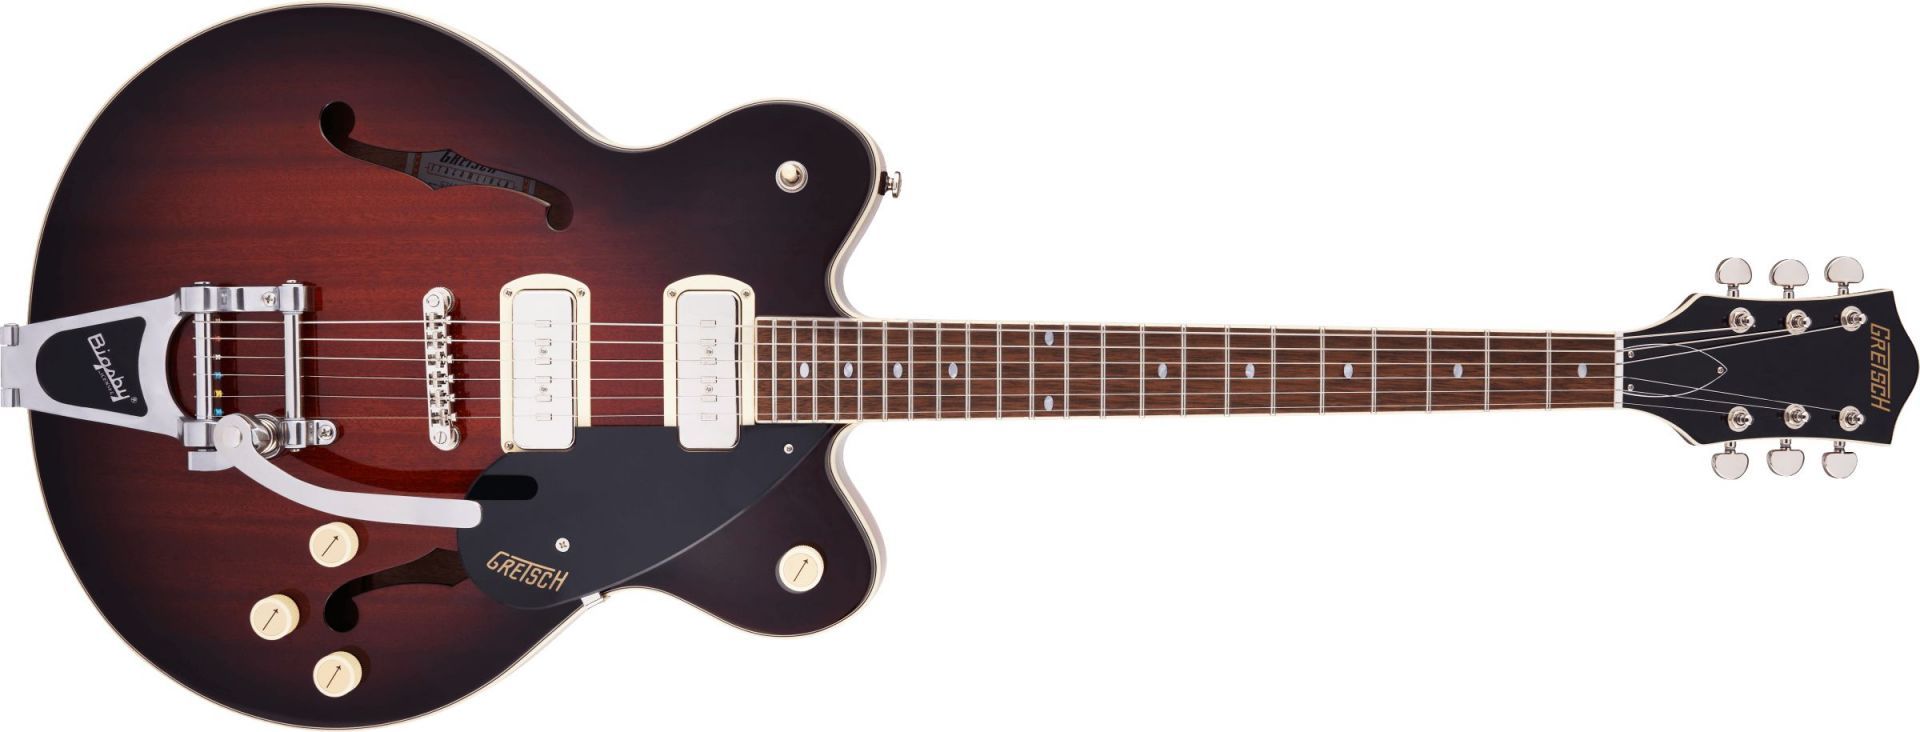 Gretsch Guitars G2622T-P90 Streamliner Center Block Double-Cut P90 with Bigsby Forge Glow